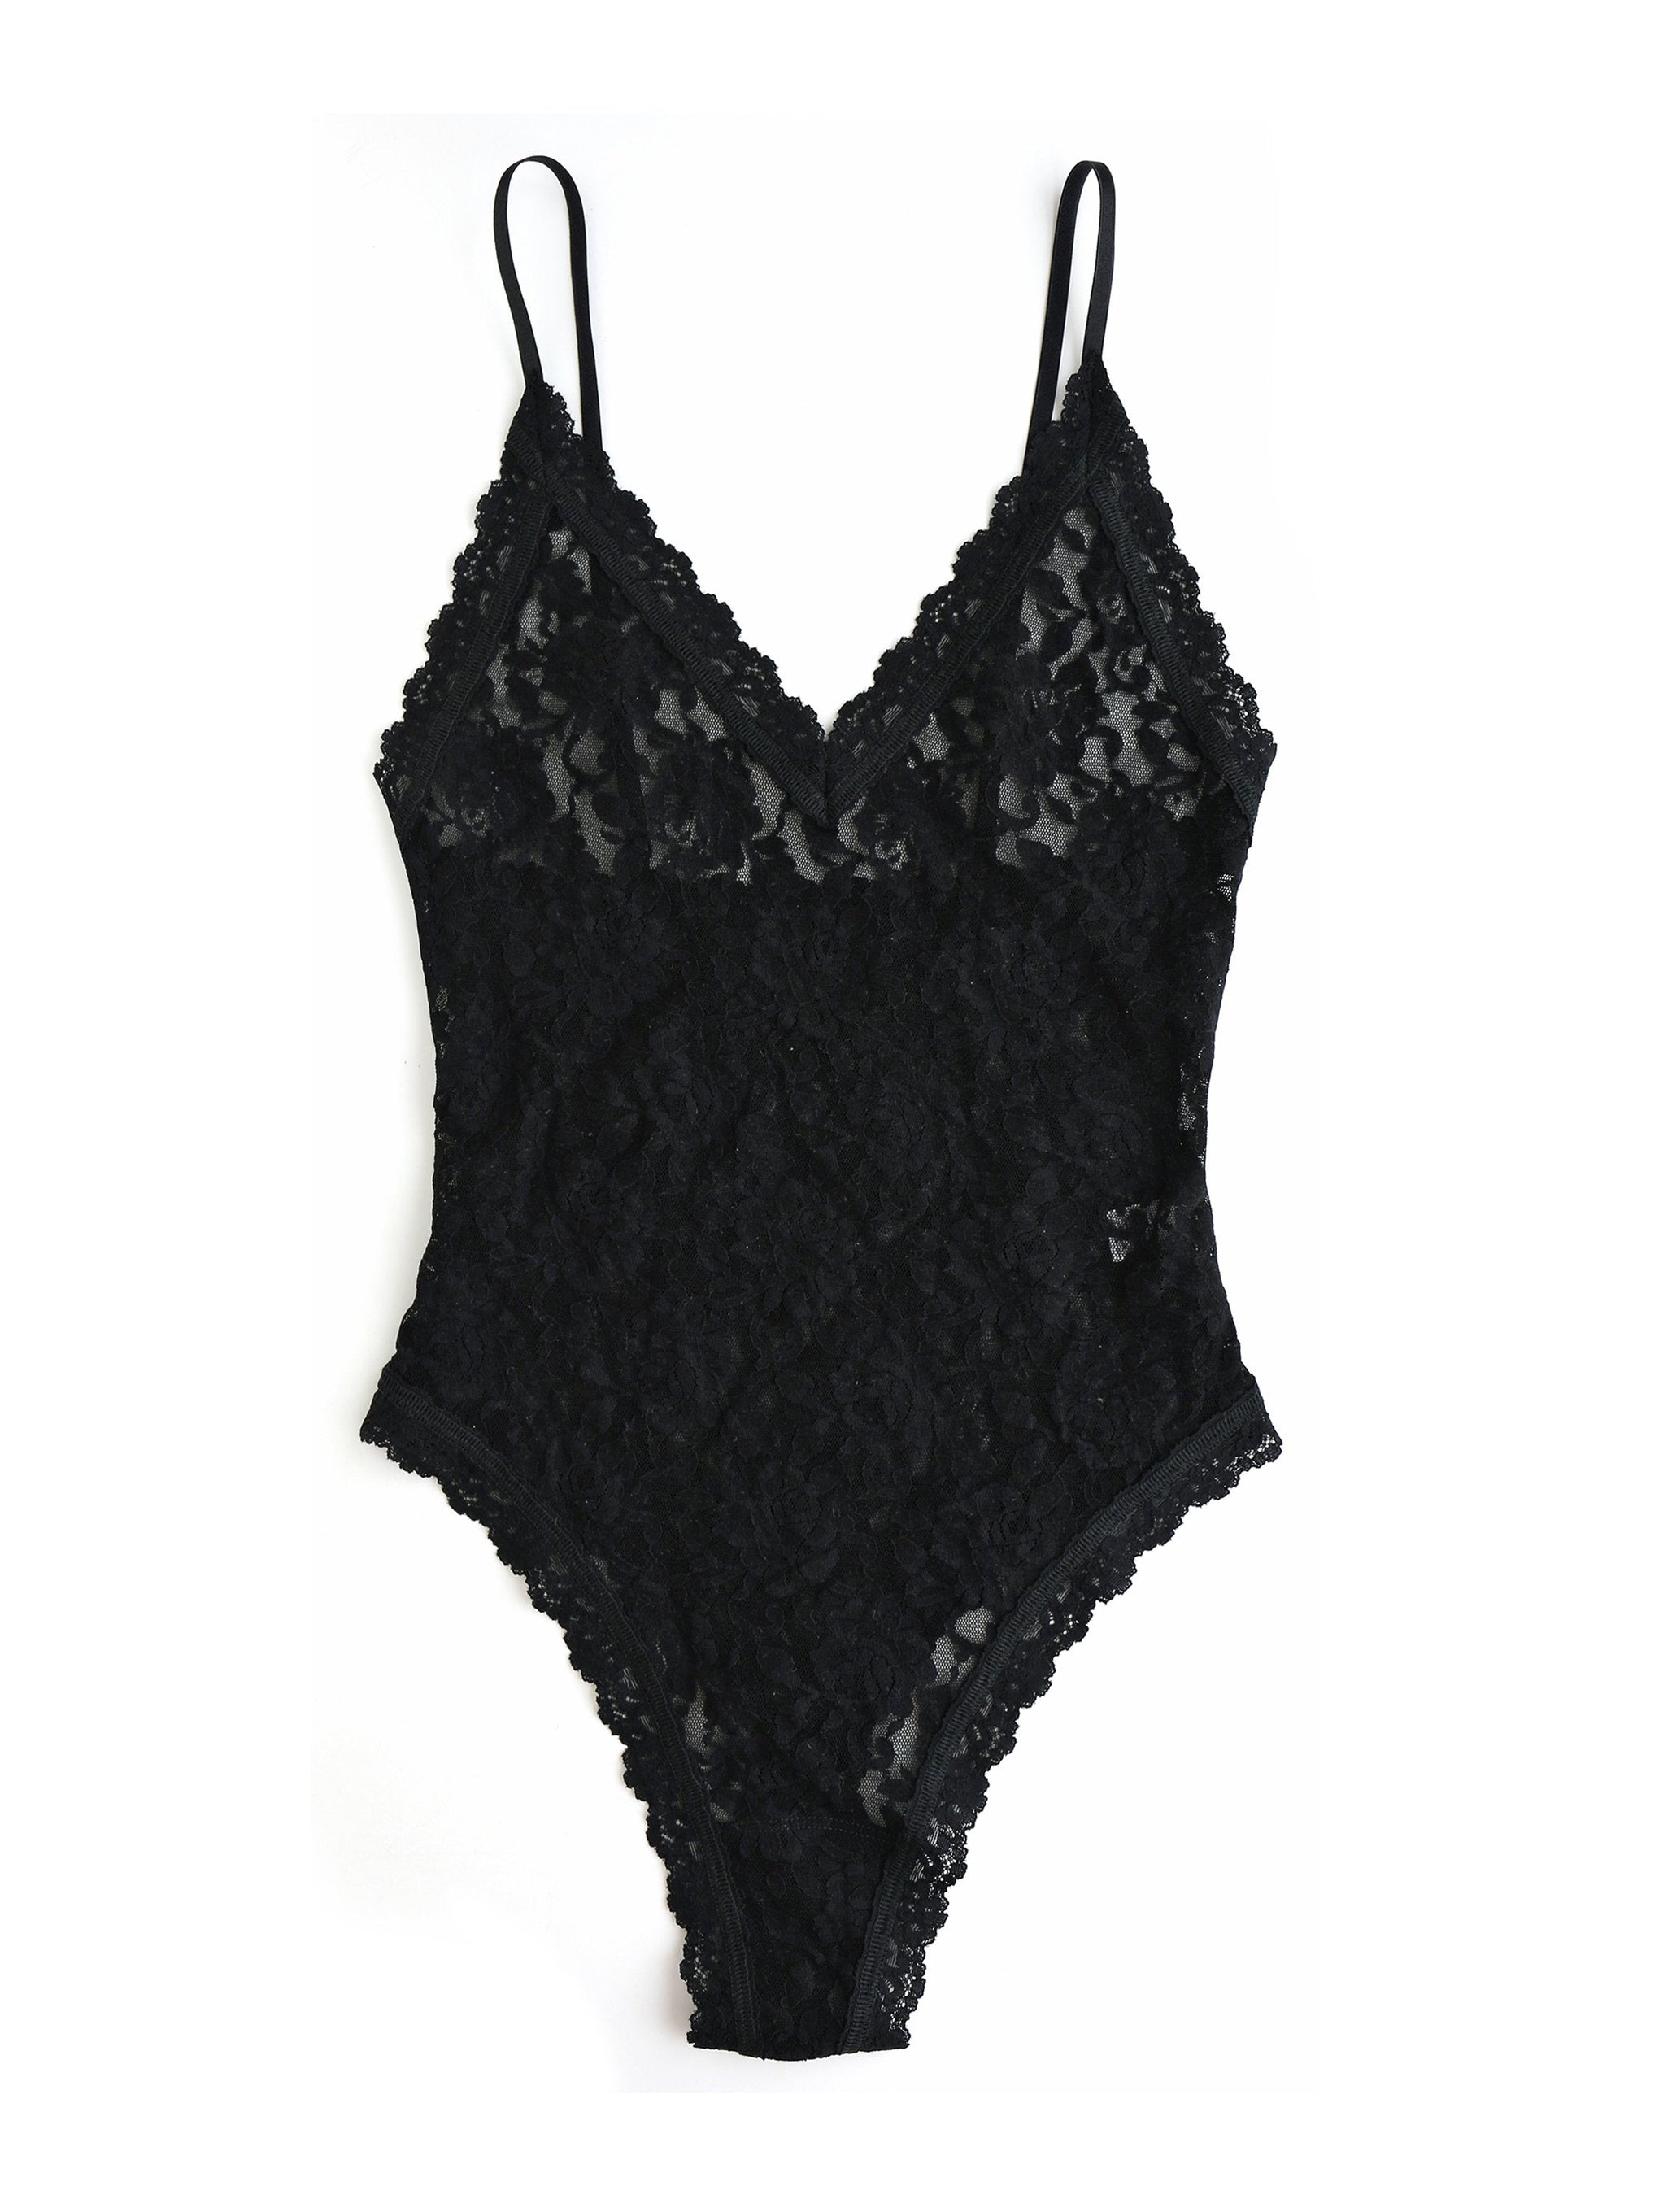 NEW Black Lace Bodysuit XL 38 B/C/D/E - $25 New With Tags - From